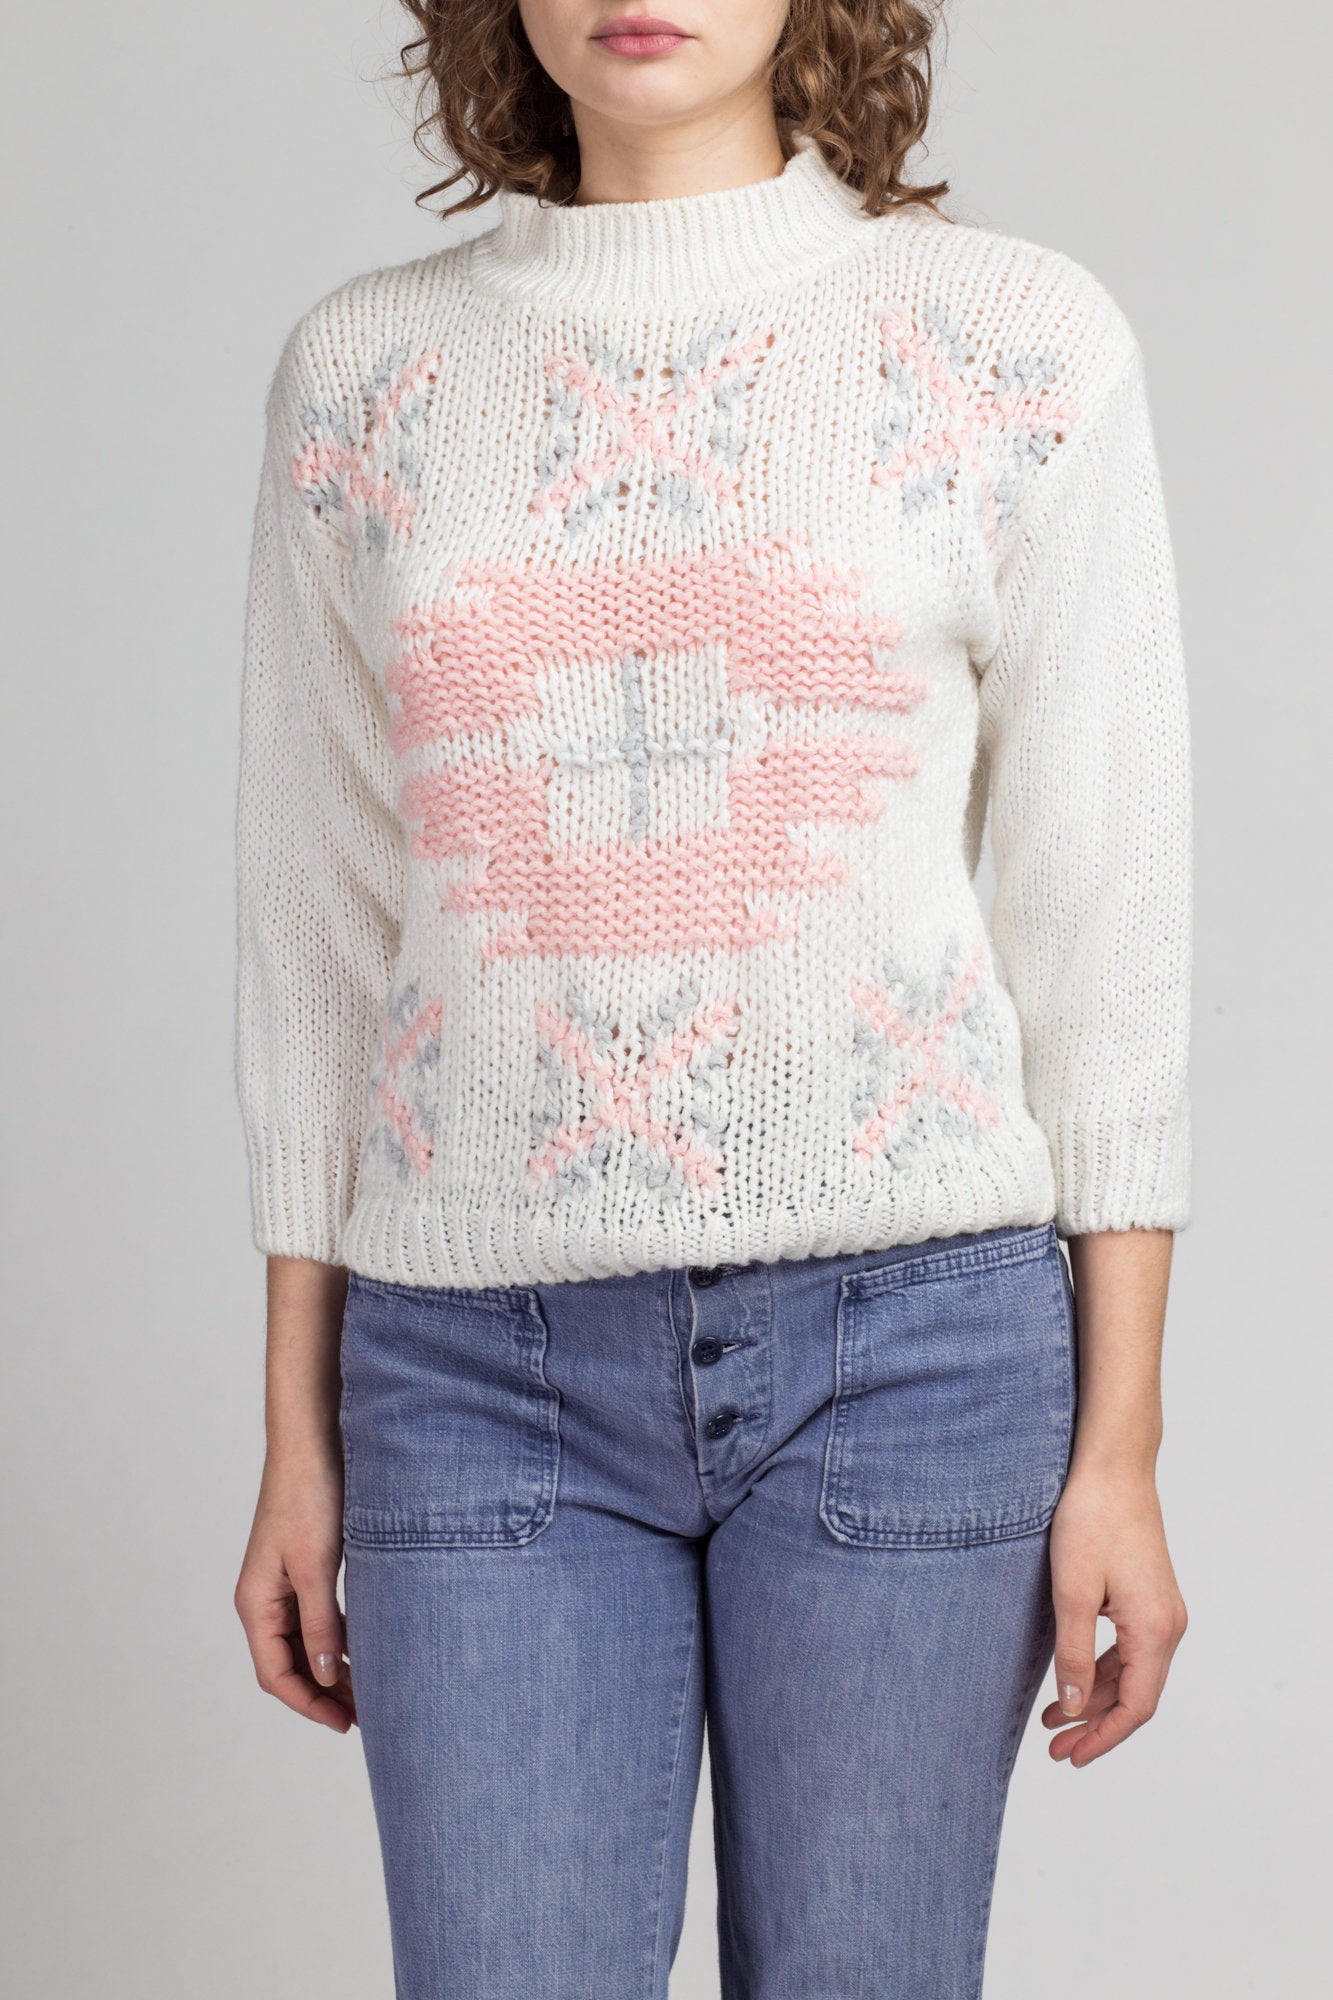 Vintage Girly Mockneck Cropped Knit Sweater - Petite Small | 80s Geometric Pink White Pullover Jumper Top